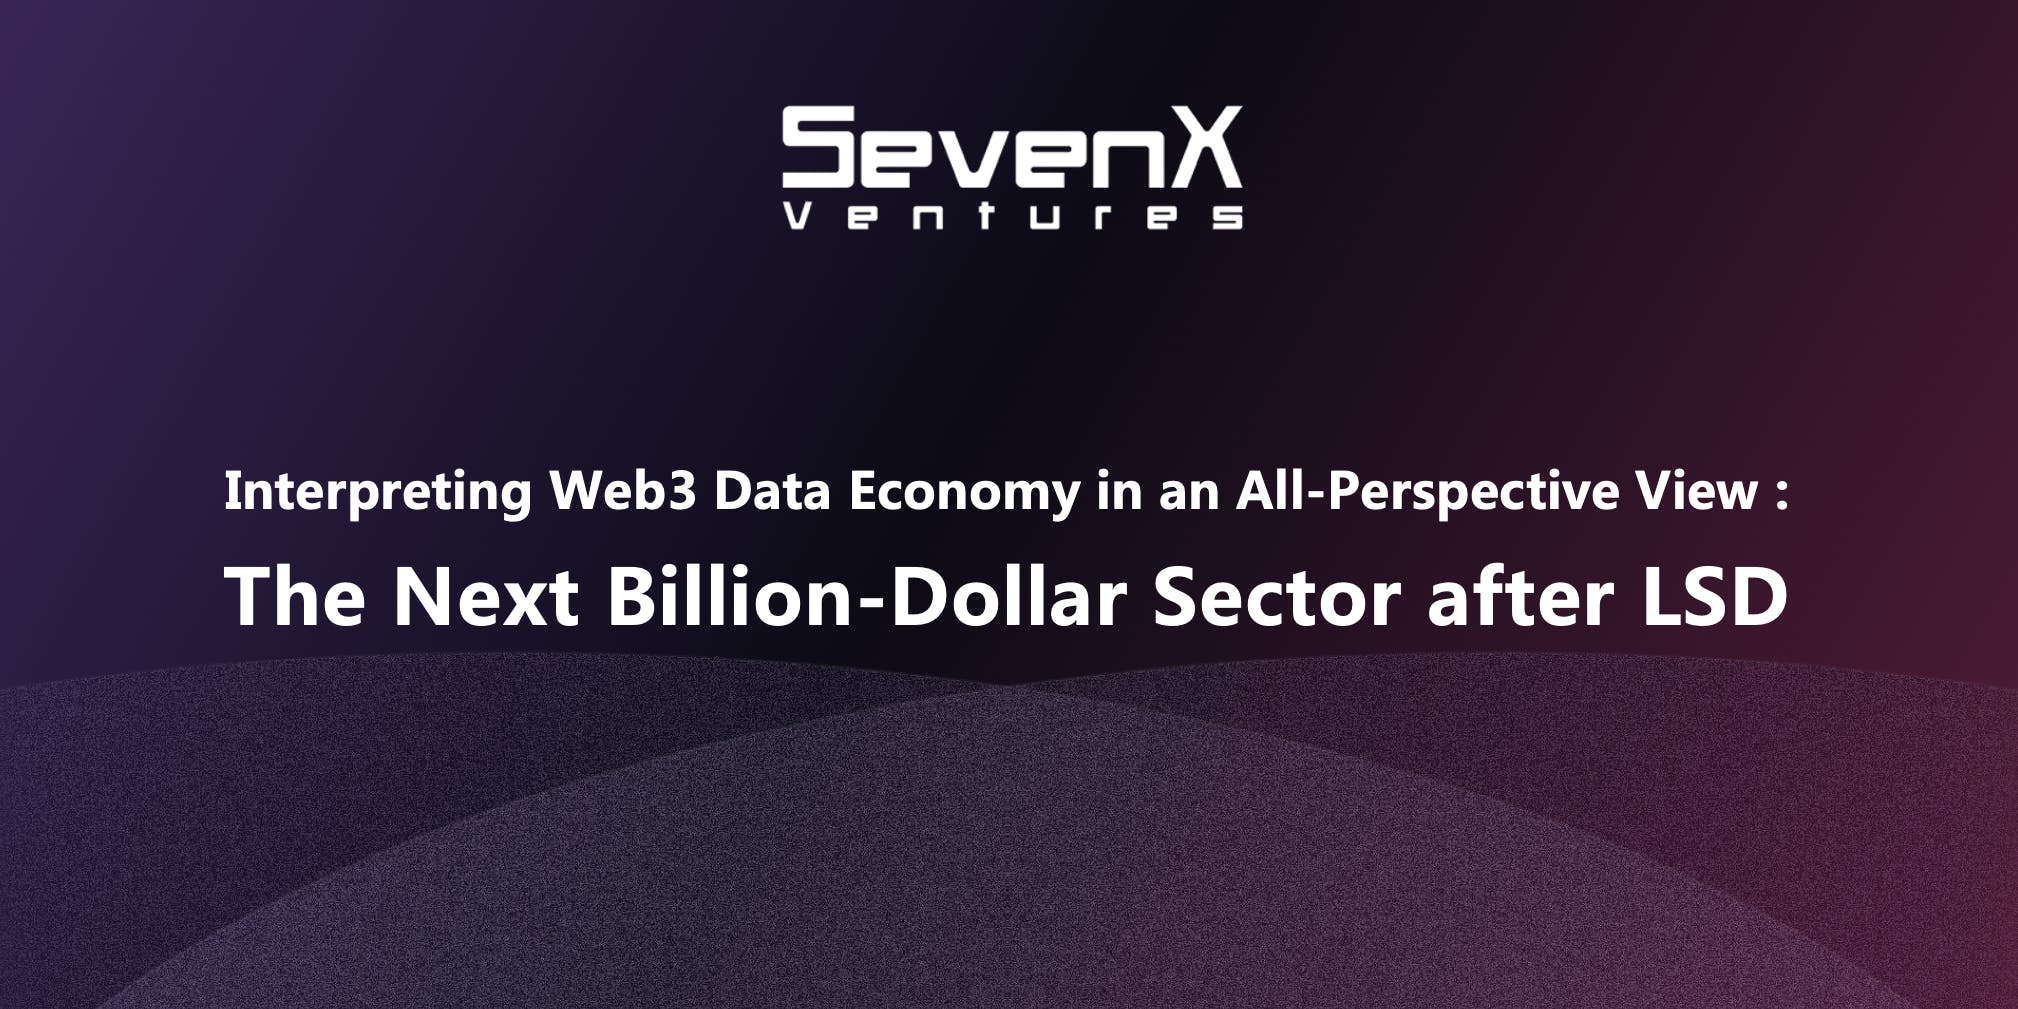 Interpreting Web3 Data Economy in an All-Perspective View: The Next Billion-Dollar Sector after LSD